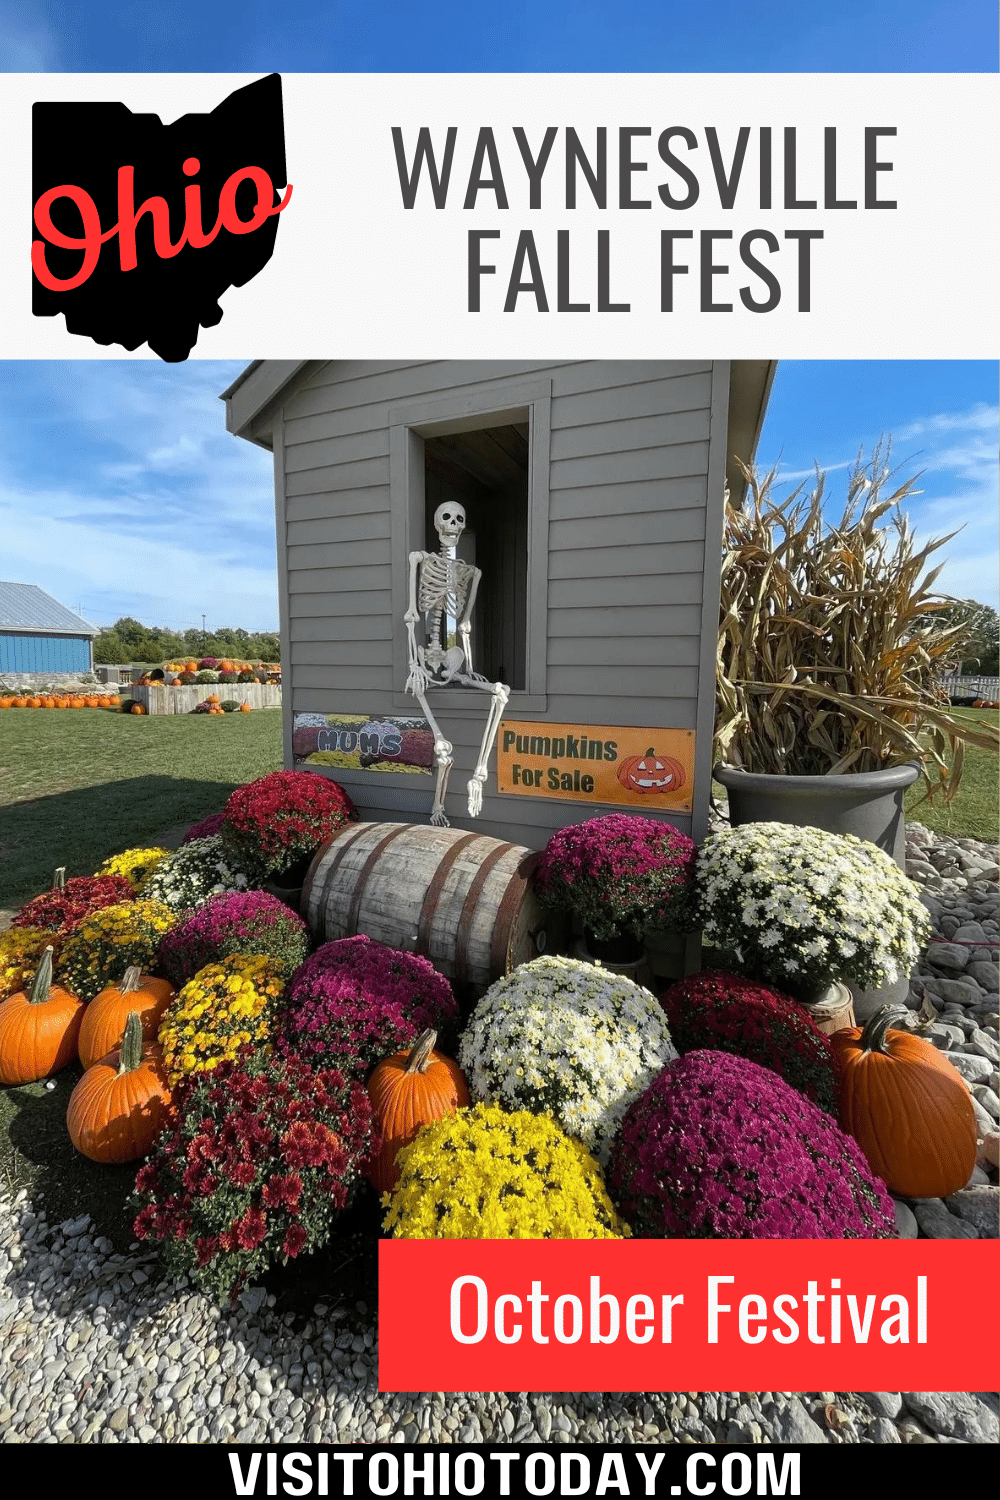 The Waynesville Fall Fest is an Ohio tradition like no other! Starting on September 16, this festival is a celebration of the state's heritage and autumn's beauty